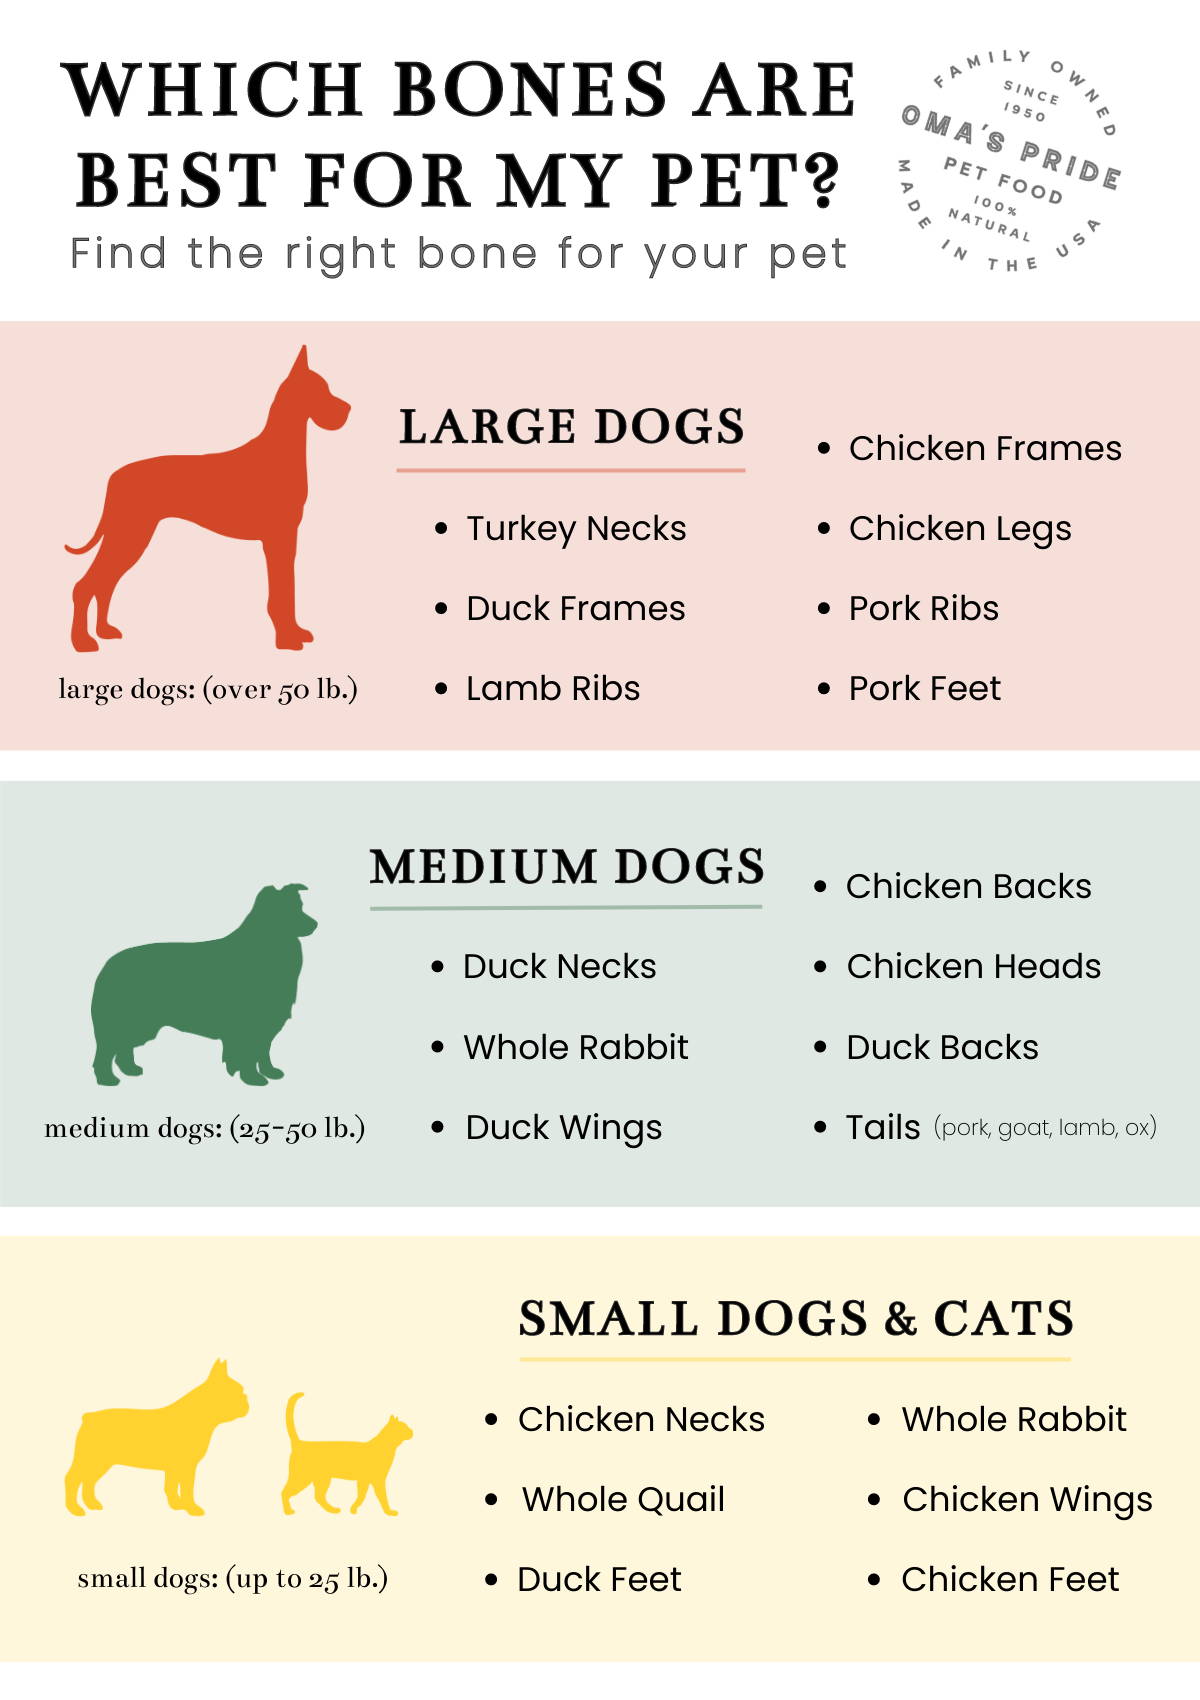 Benefits of Raw Bones: Boost Your Dog's Health & Happiness